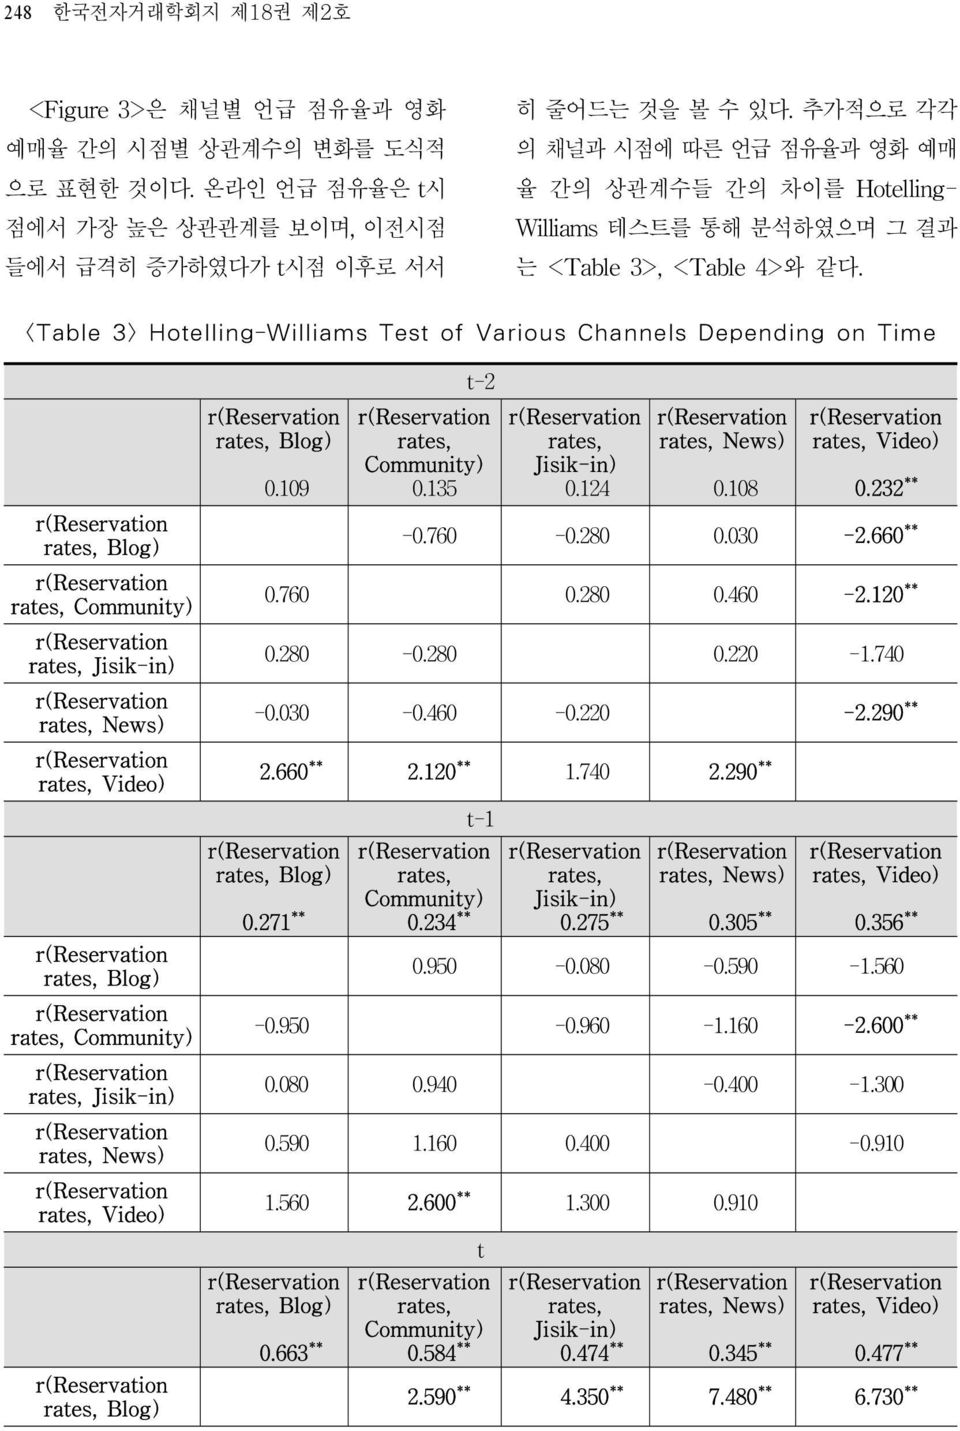 <Table 3> Hotelling-Williams Test of Various Channels Depending on Time Blog) Community) Jisik-in) News) Video) Blog) Community) Jisik-in) News) Video) Blog) Blog) 0.109 t-2 Community) 0.